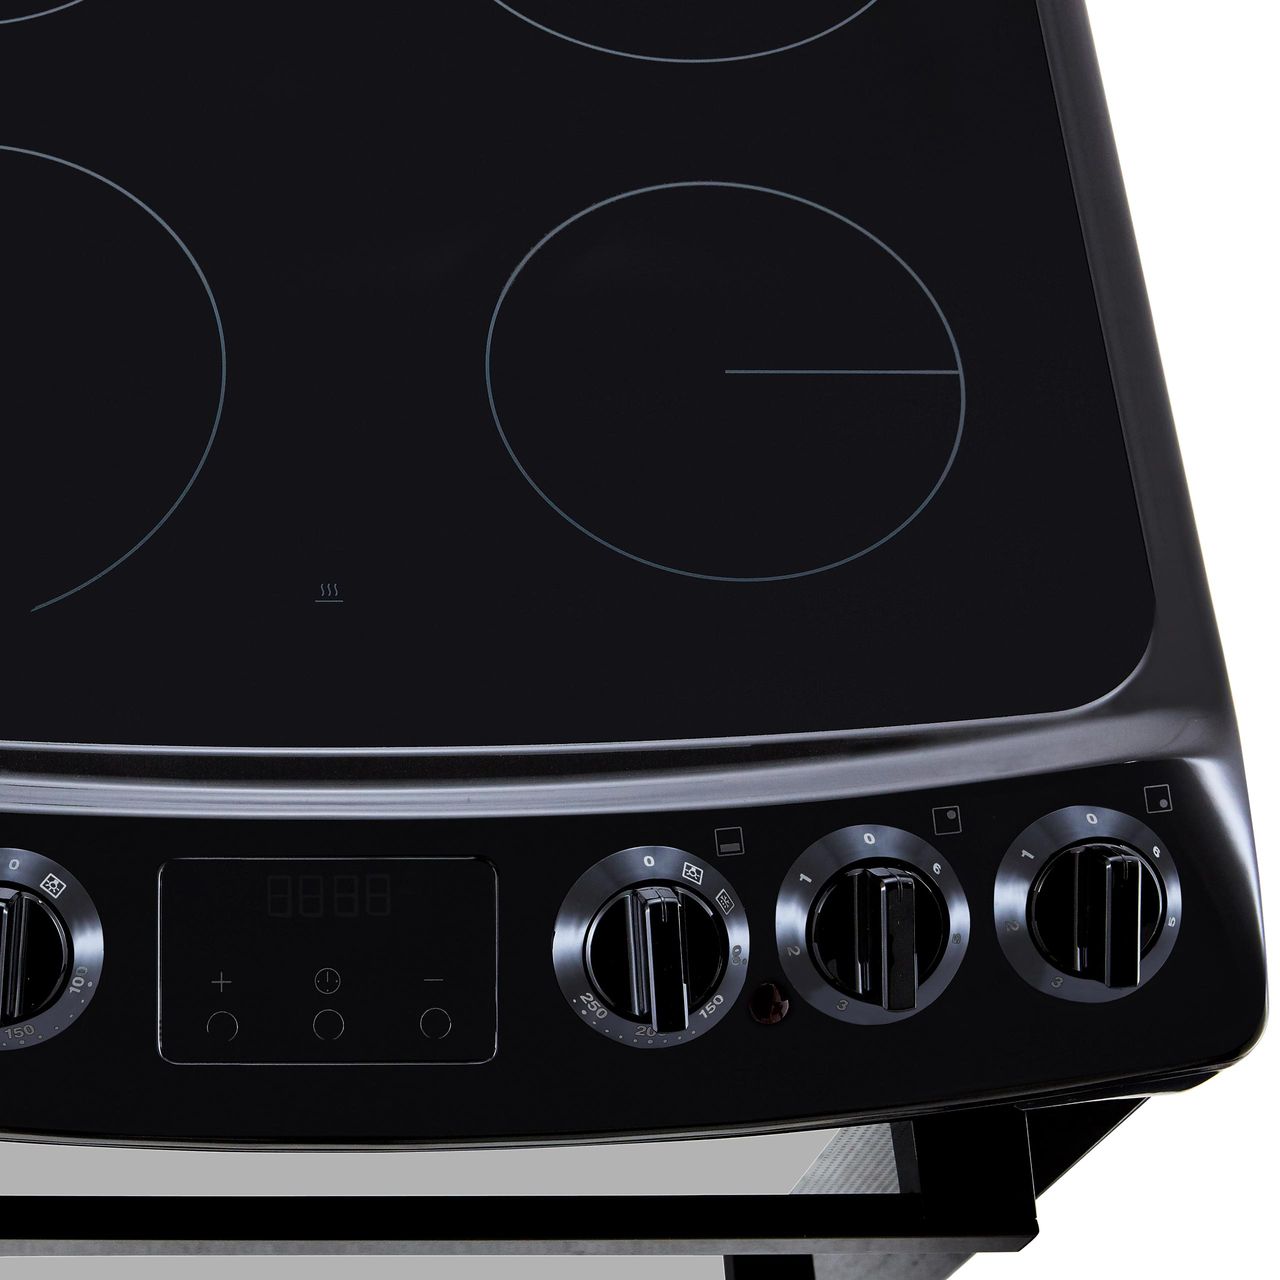 55cm electric cooker with induction hob